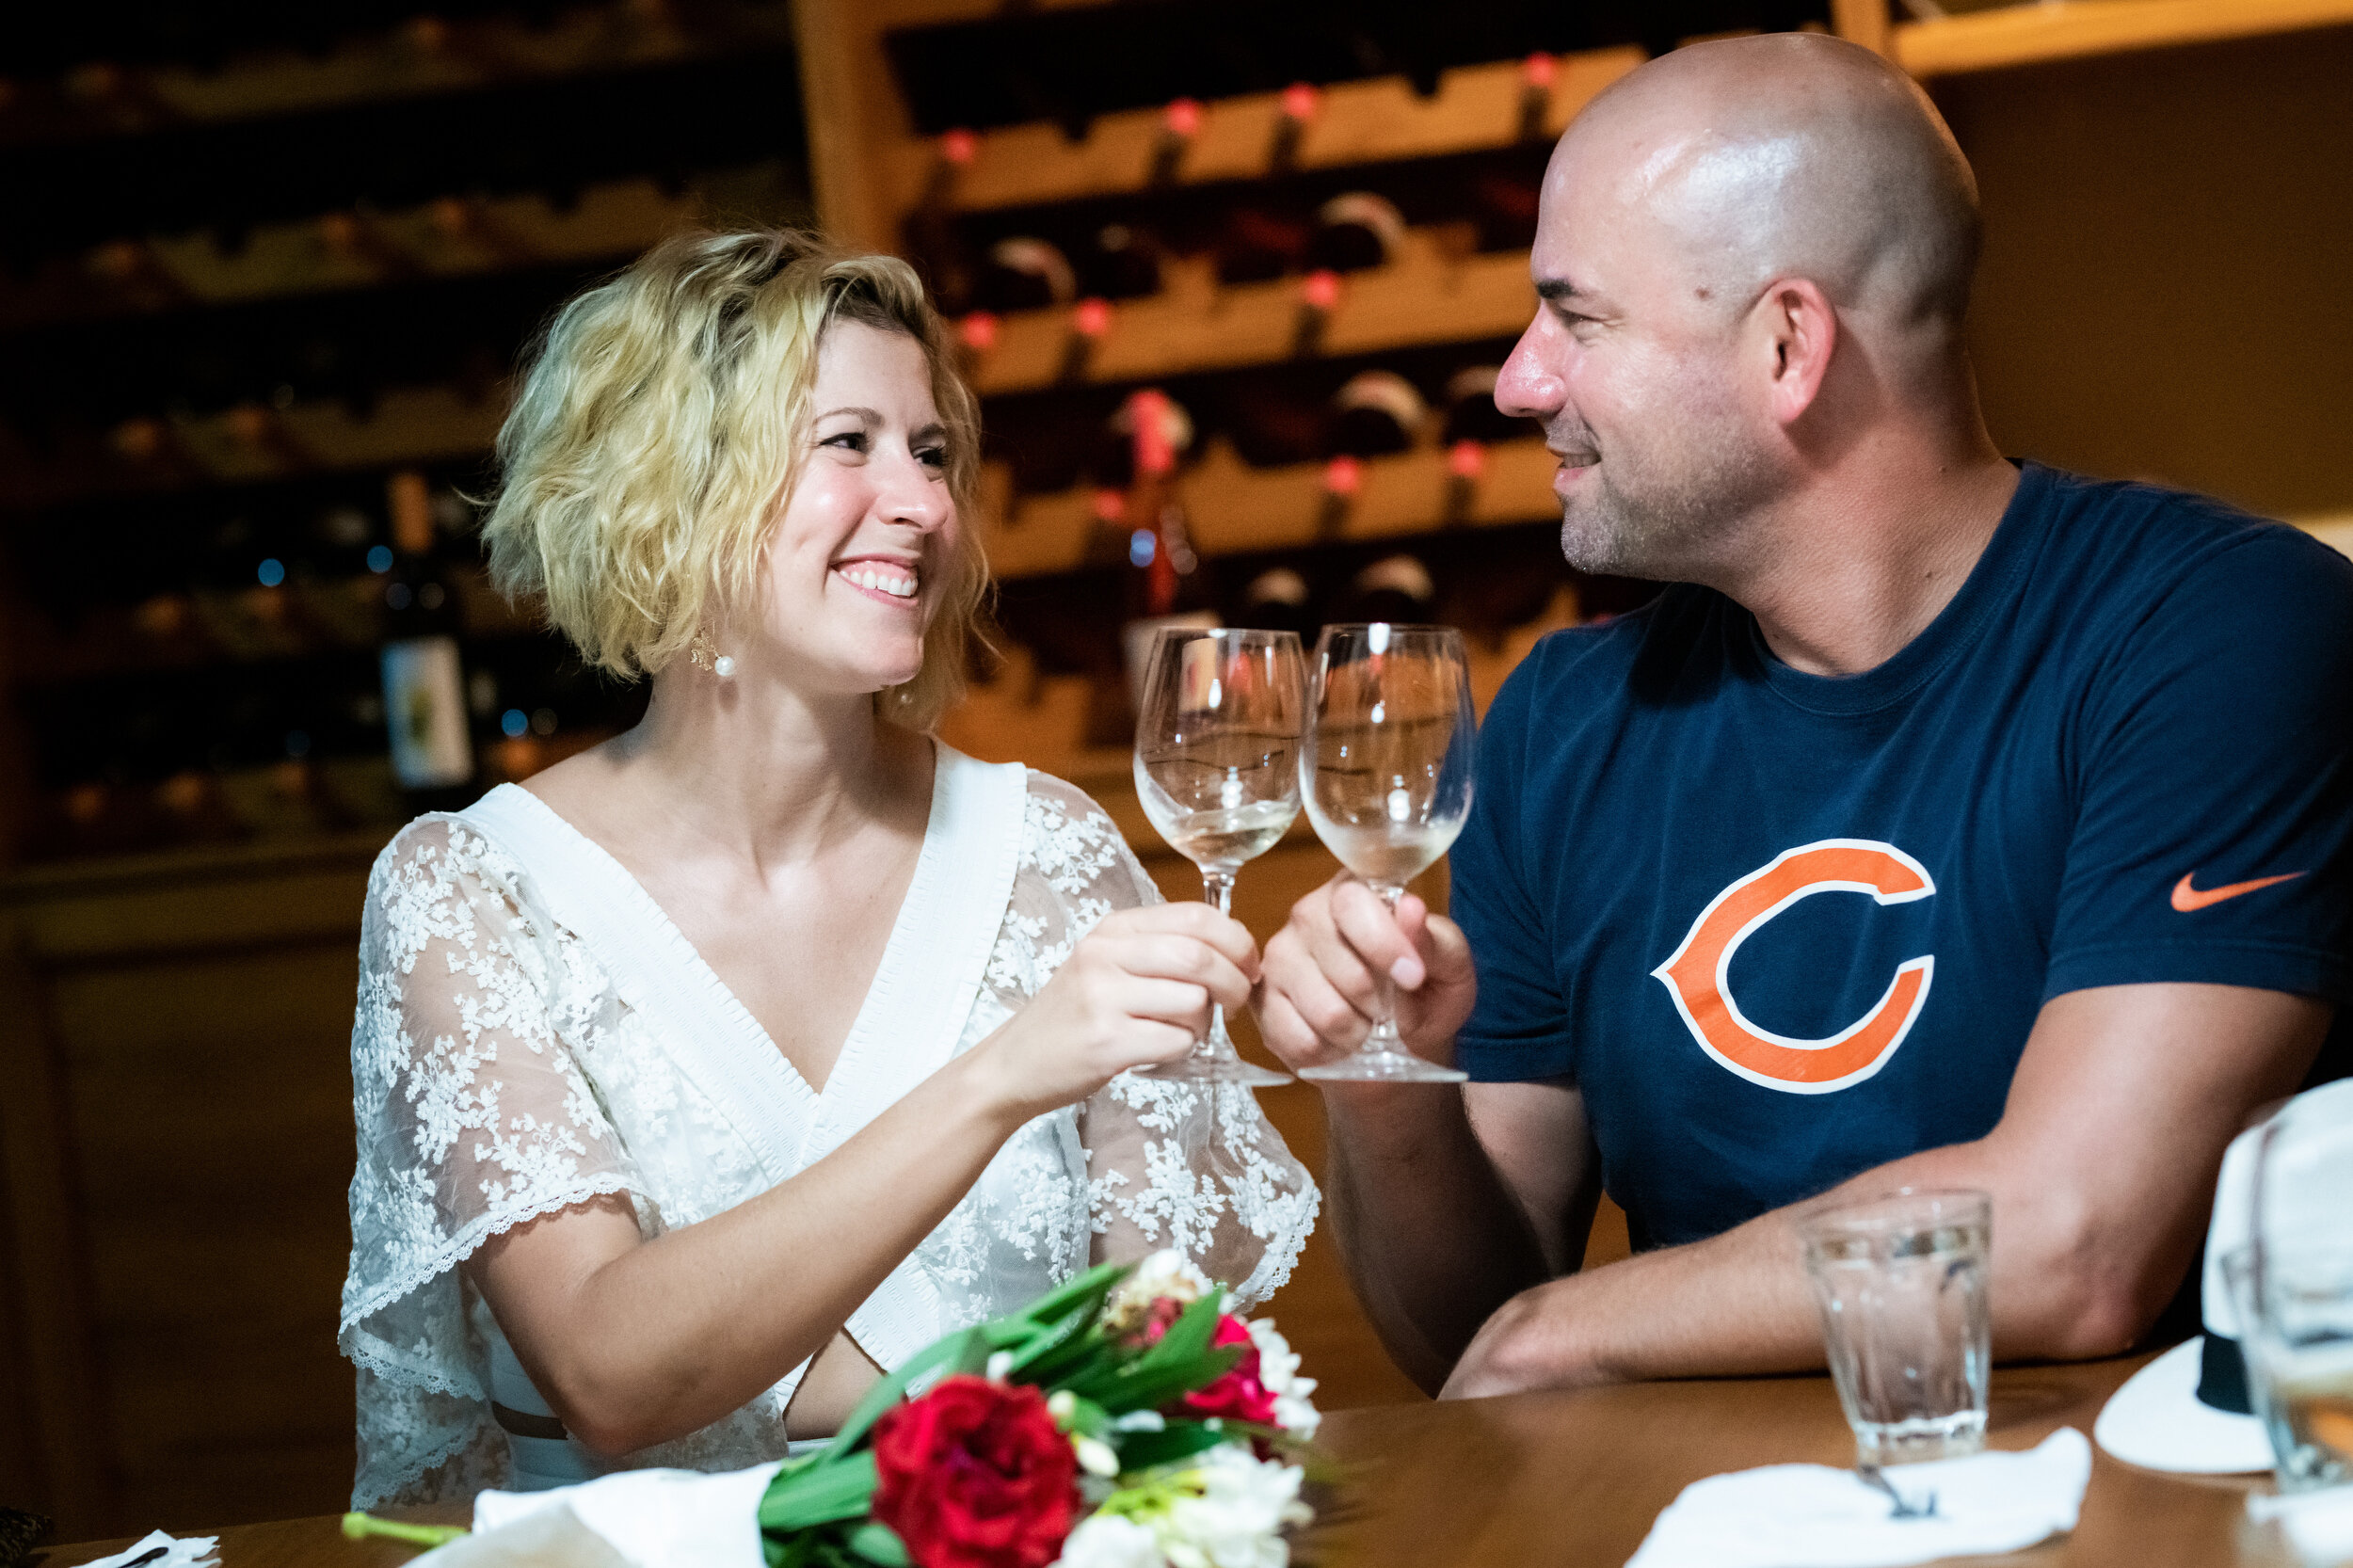 Bride and groom toast during a wine tasting at Patistis Vineyards: photo of destination wedding in Greece by J. Brown Photography.